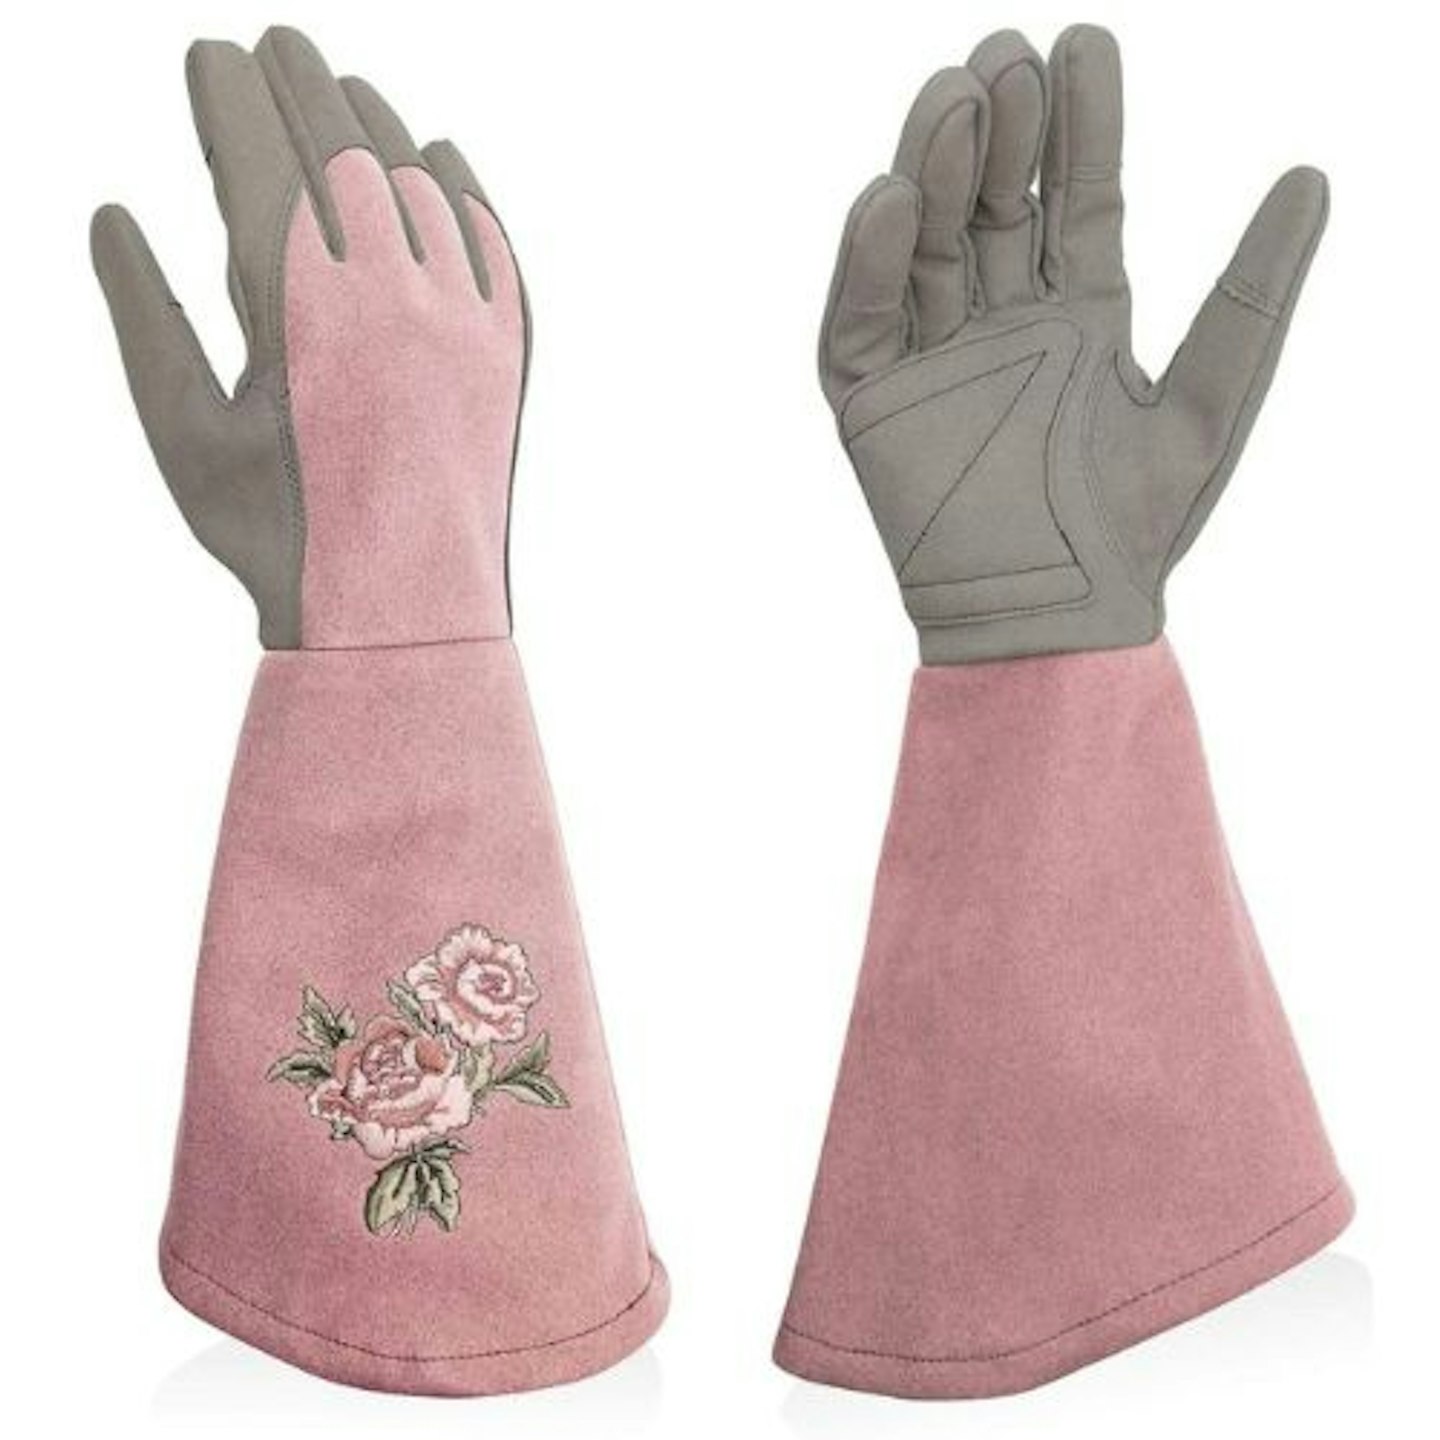  Intra-FIT Rose Embroidery Pruning Gloves